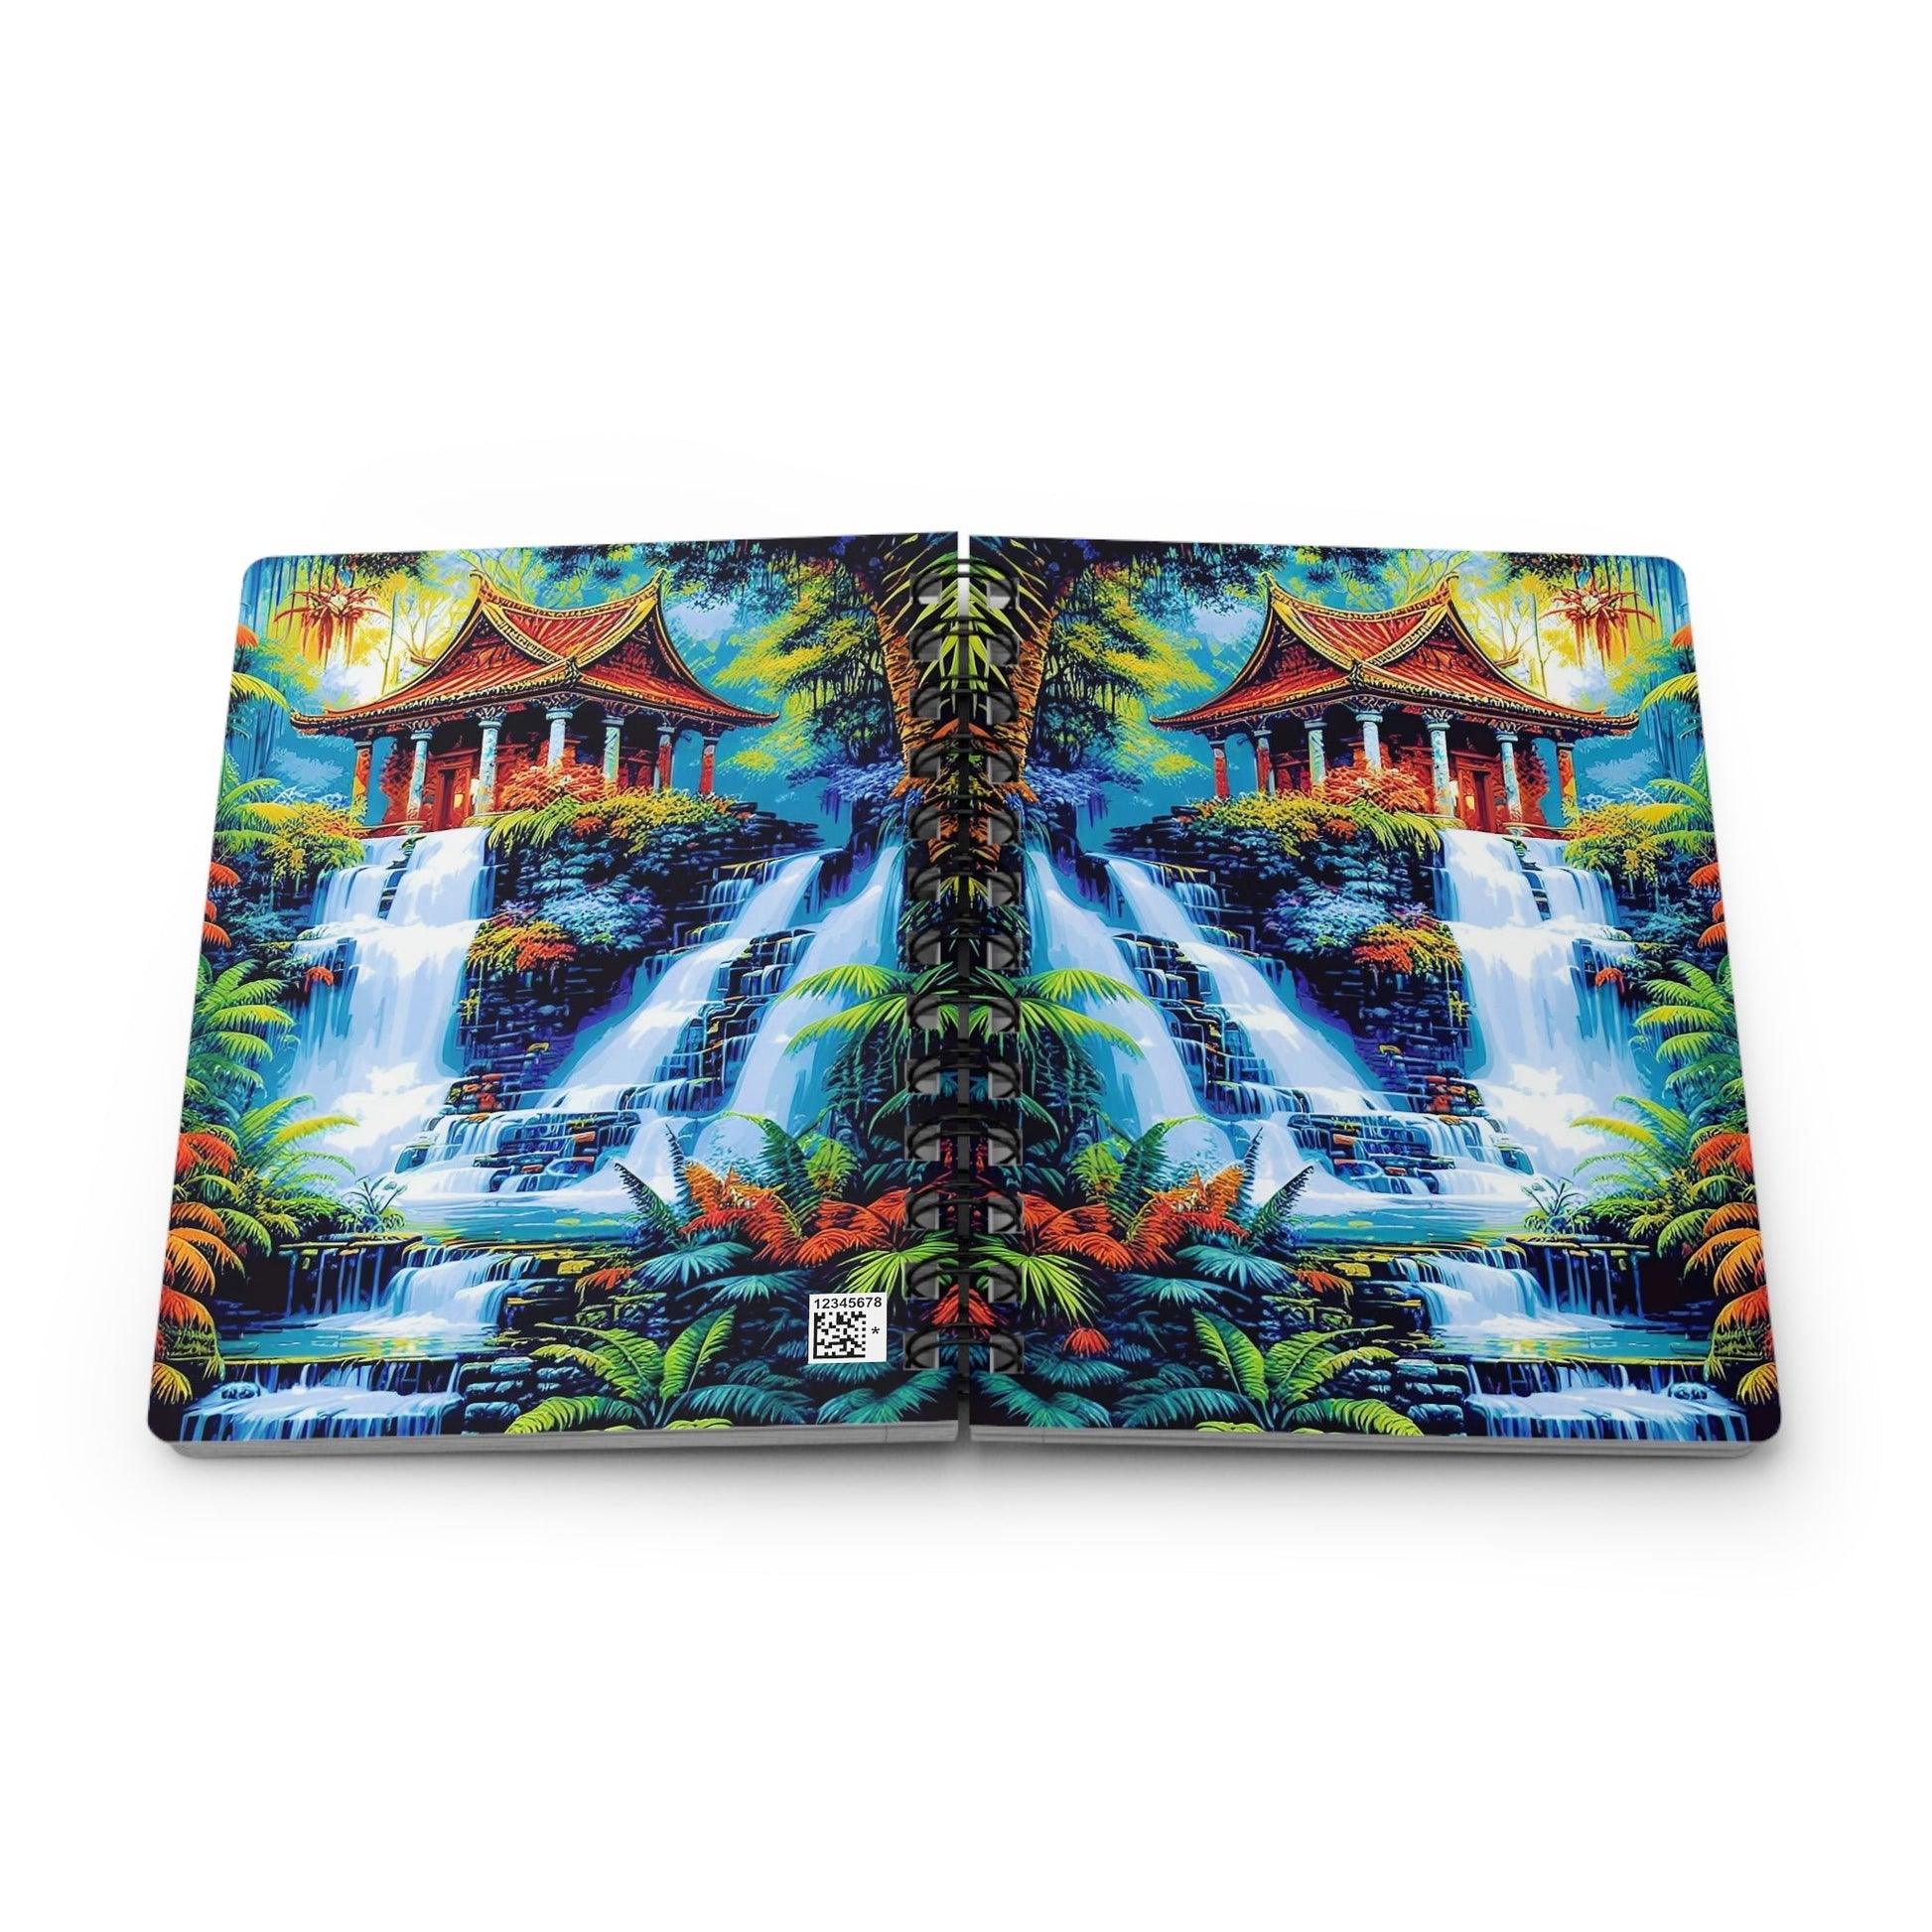 CrazyYetiClothing, CYC, The Temple (Spiral Bound Journal), Paper products